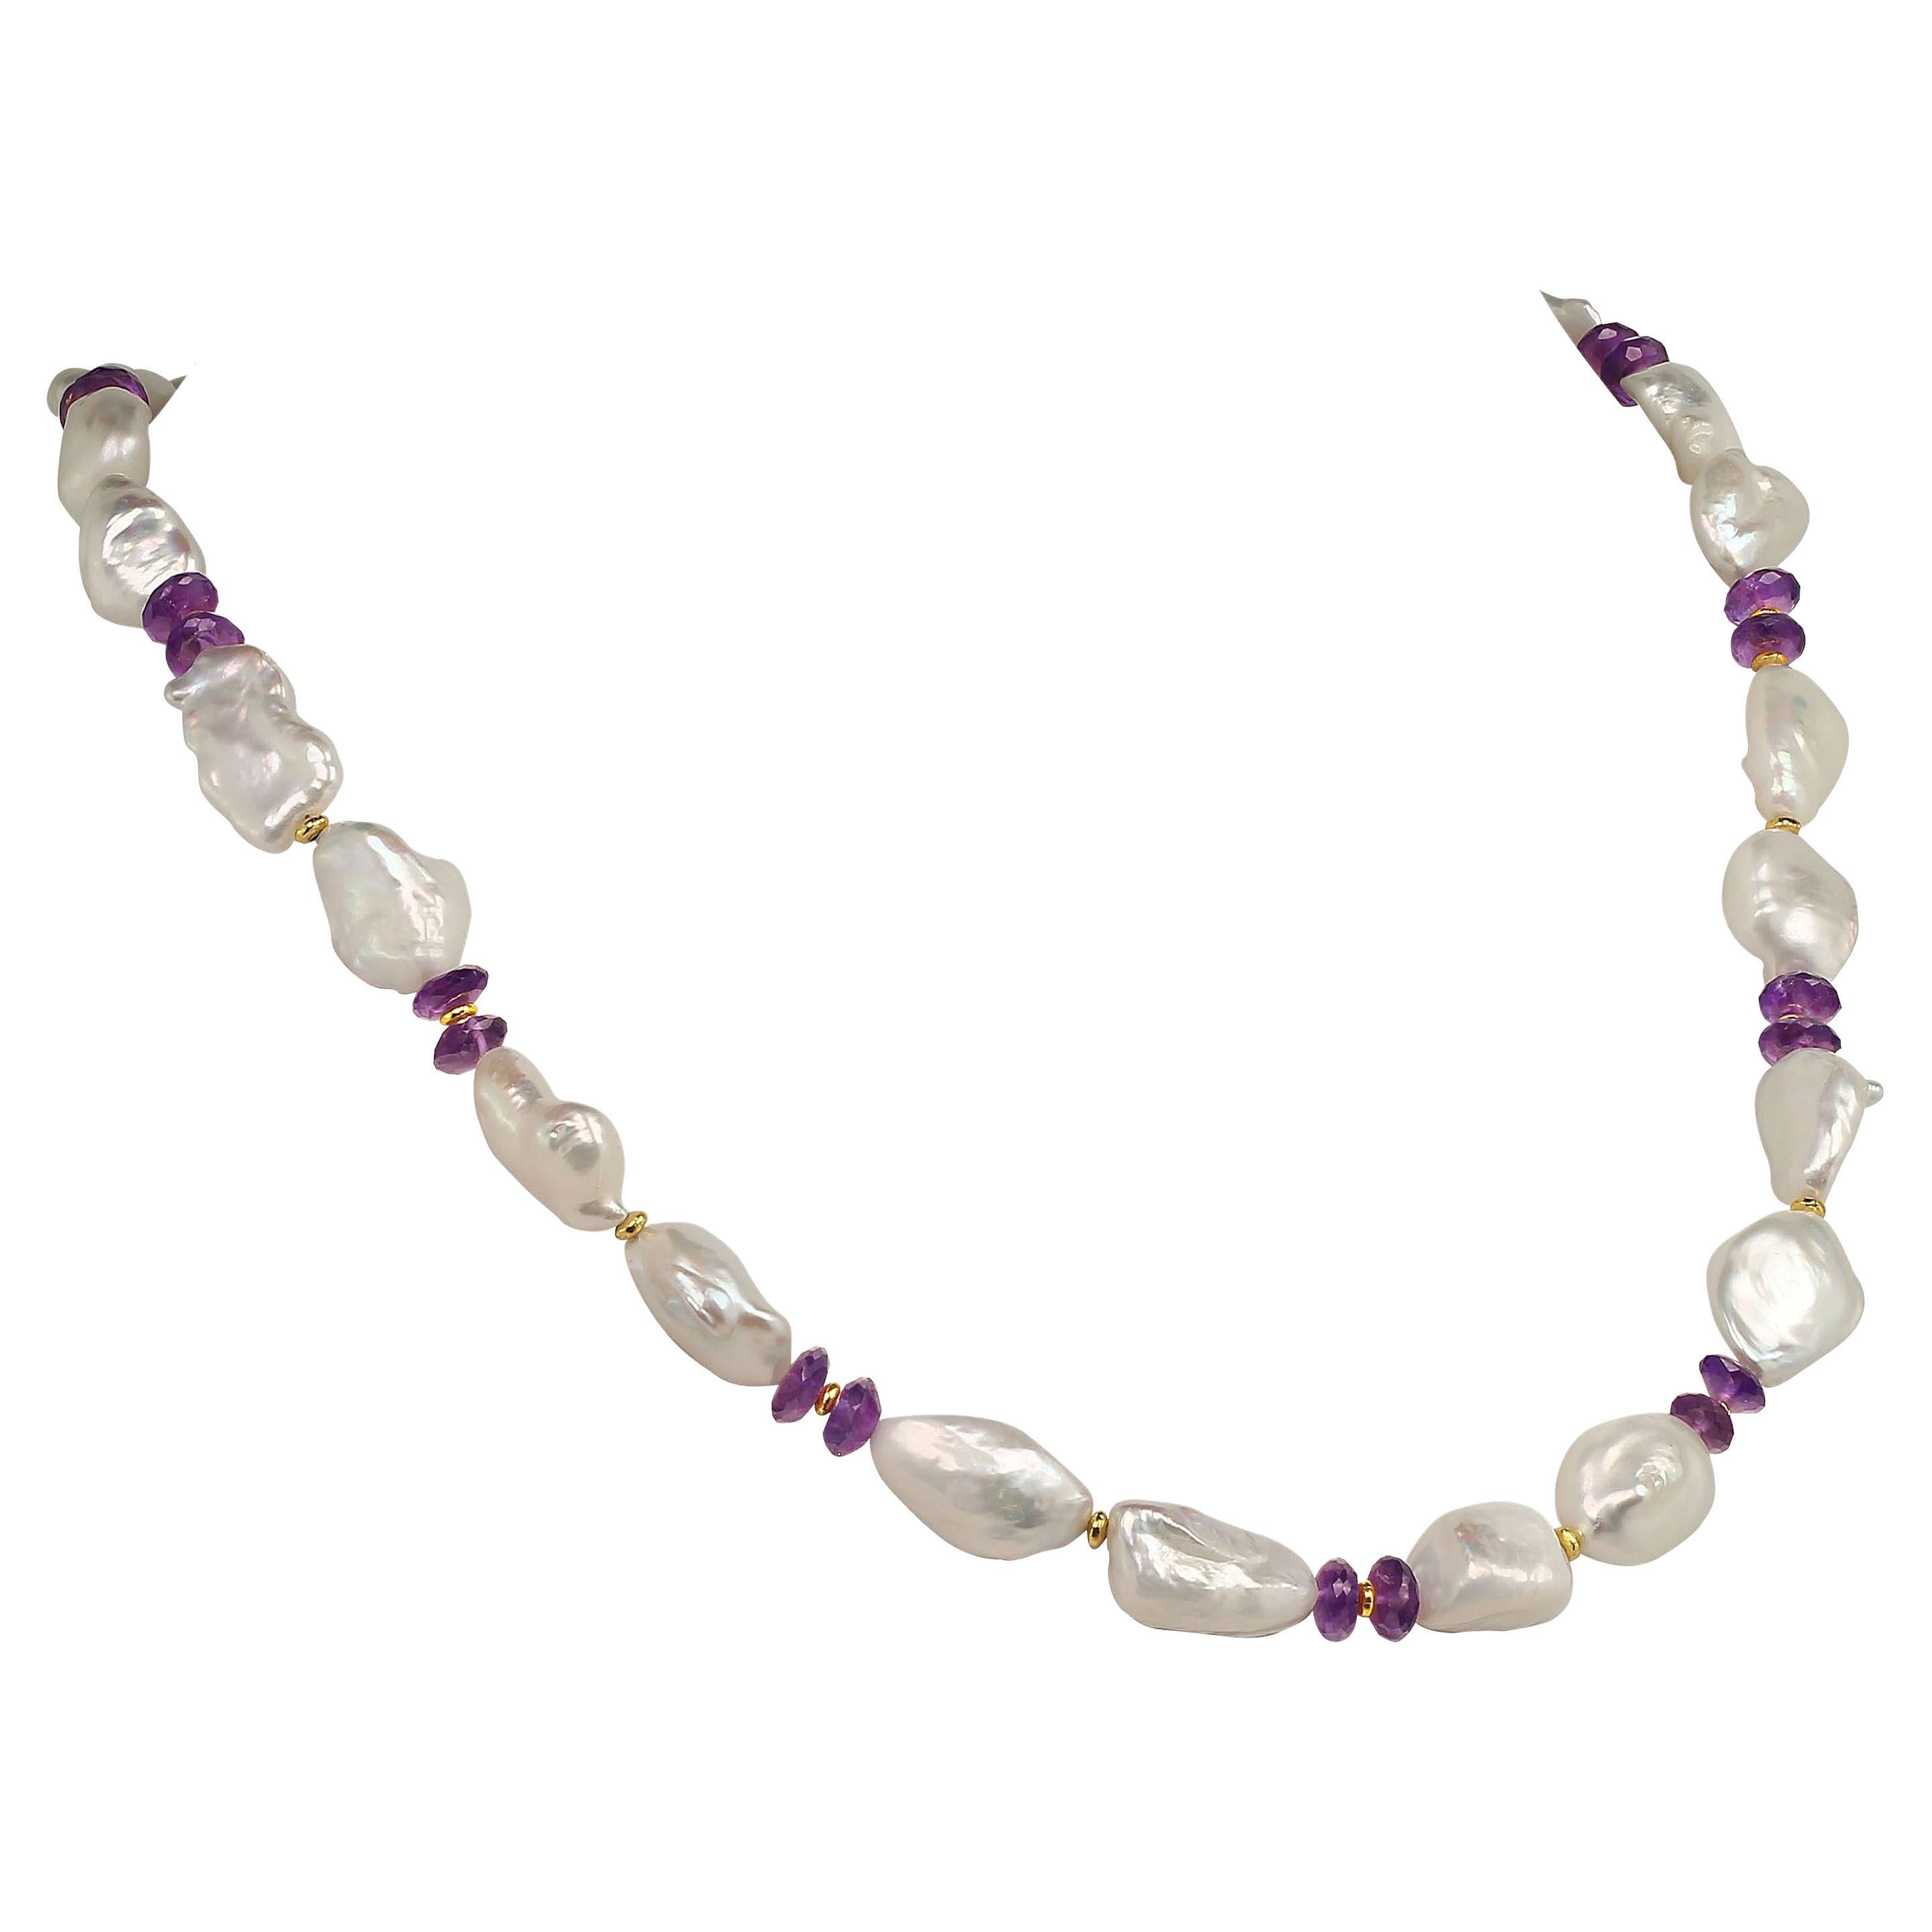 Own the jewelry you desire.

Elegant, handmade necklace of iridescent white baroque Pearls and sparkling Amethyst rondelles. Nothing is lovelier than Pearls and Amethyst! These gorgeous iridescent Pearls flash pinky next to the sparkling Amethyst